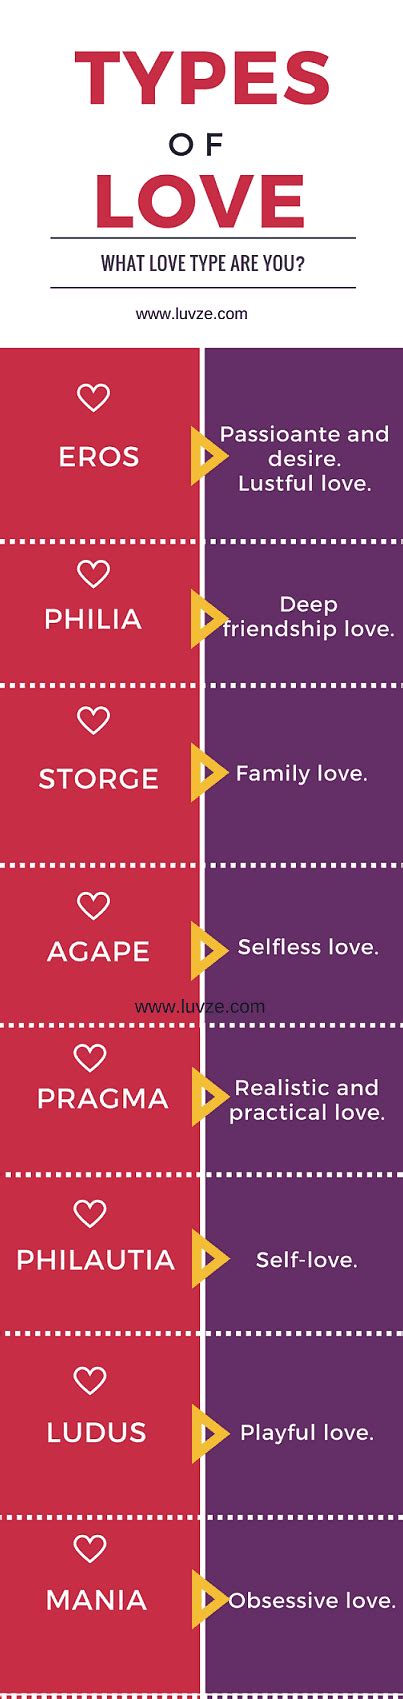 The Types Of Love According To Greece Rcoolguides